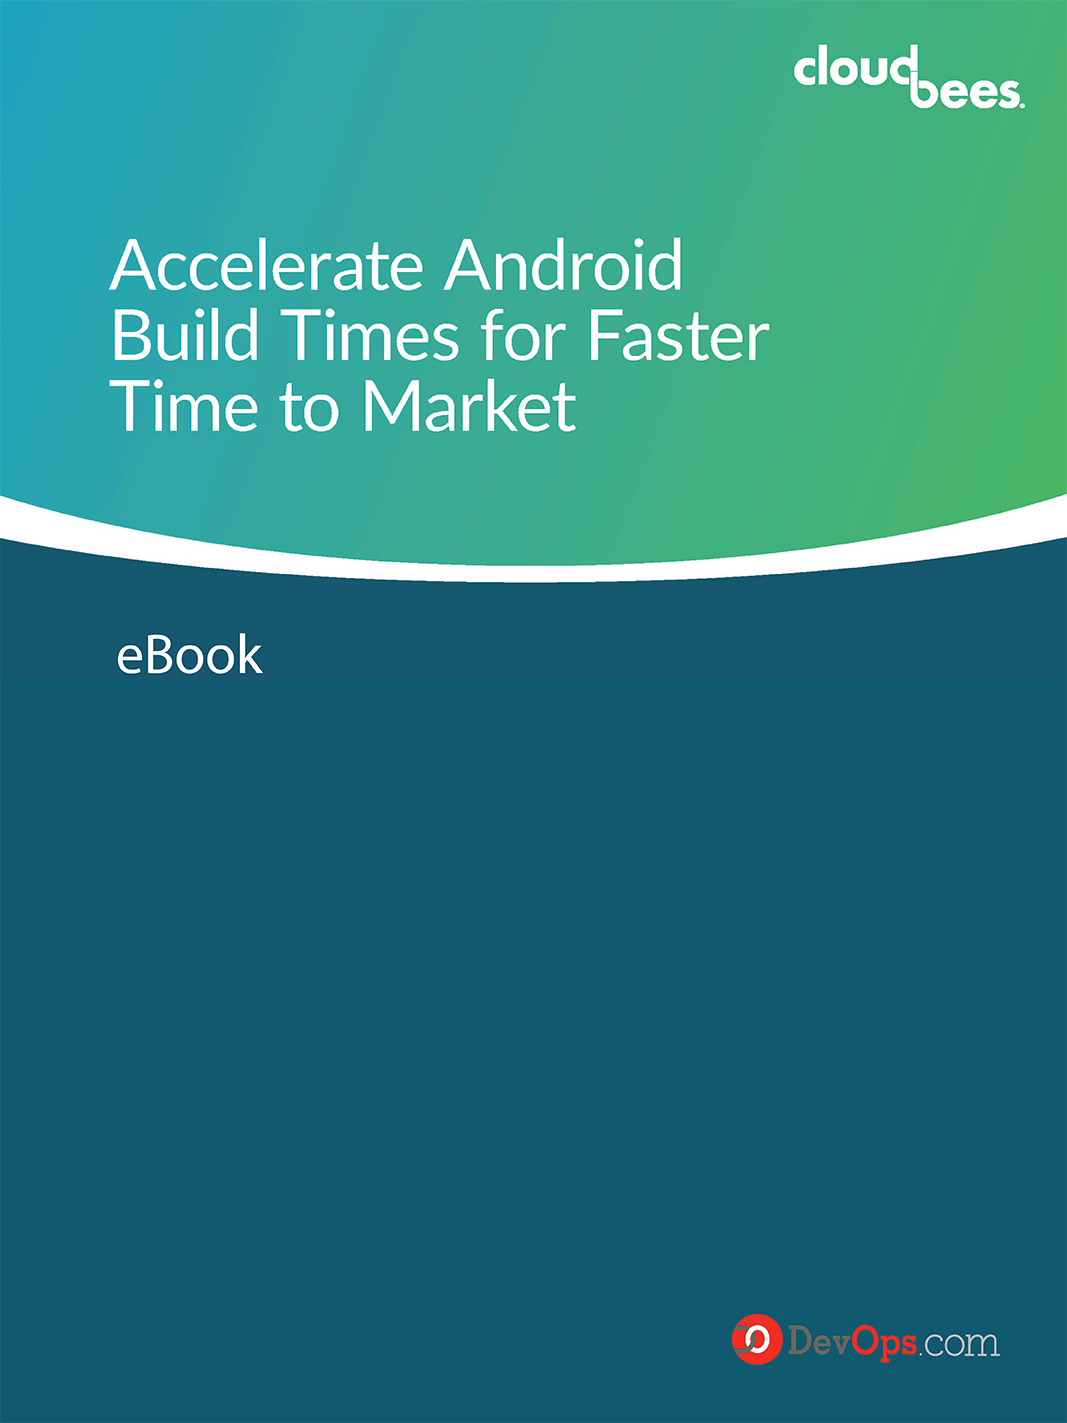 accelerate-android-build-